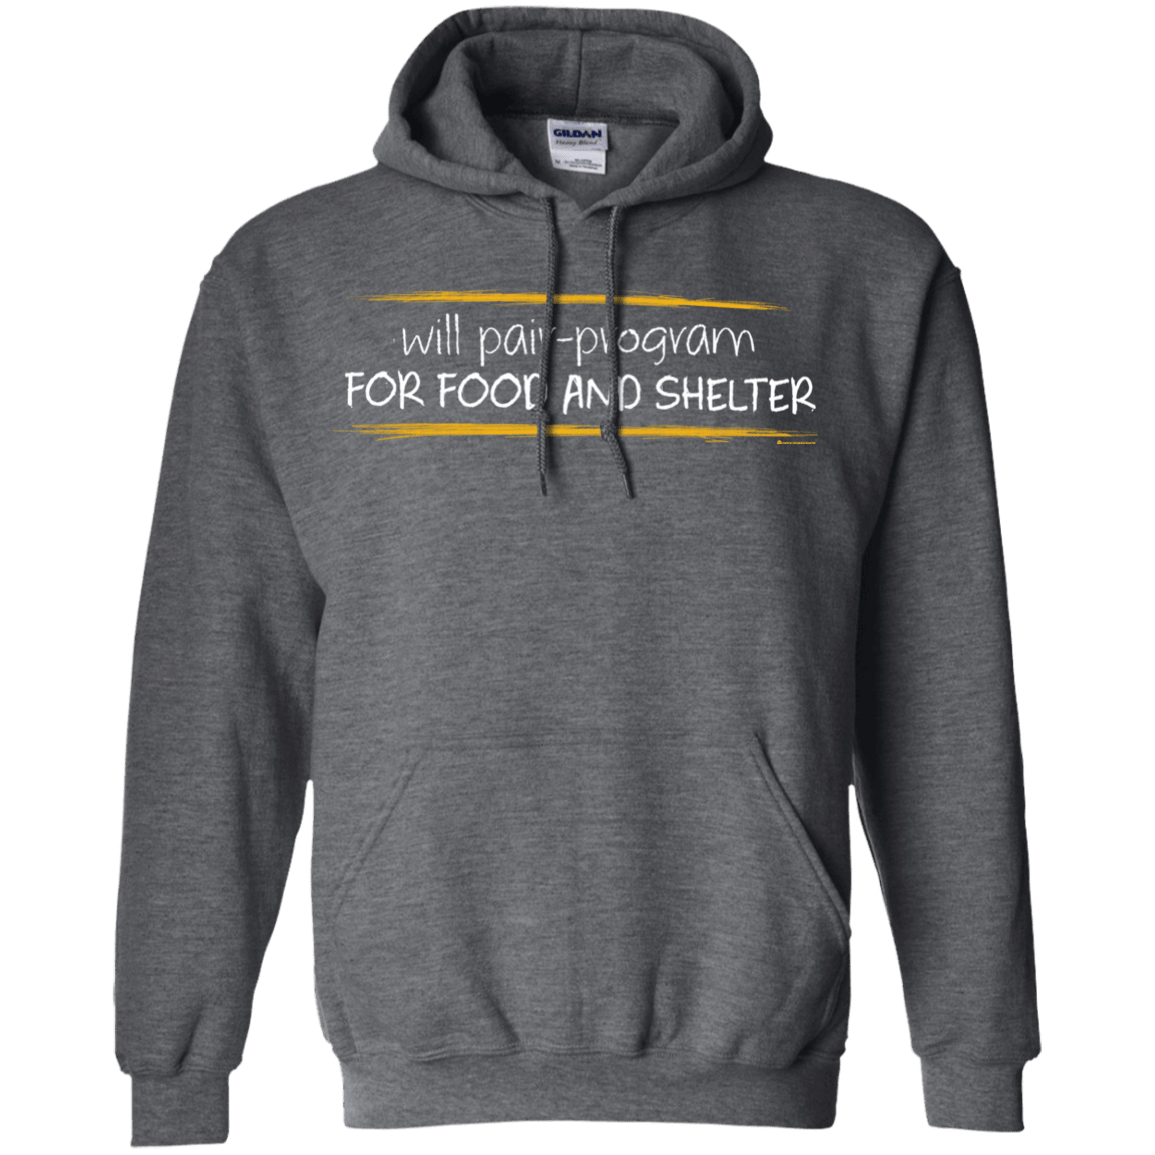 Sweatshirts Dark Heather / Small Pair Programming For Food And Shelter Pullover Hoodie